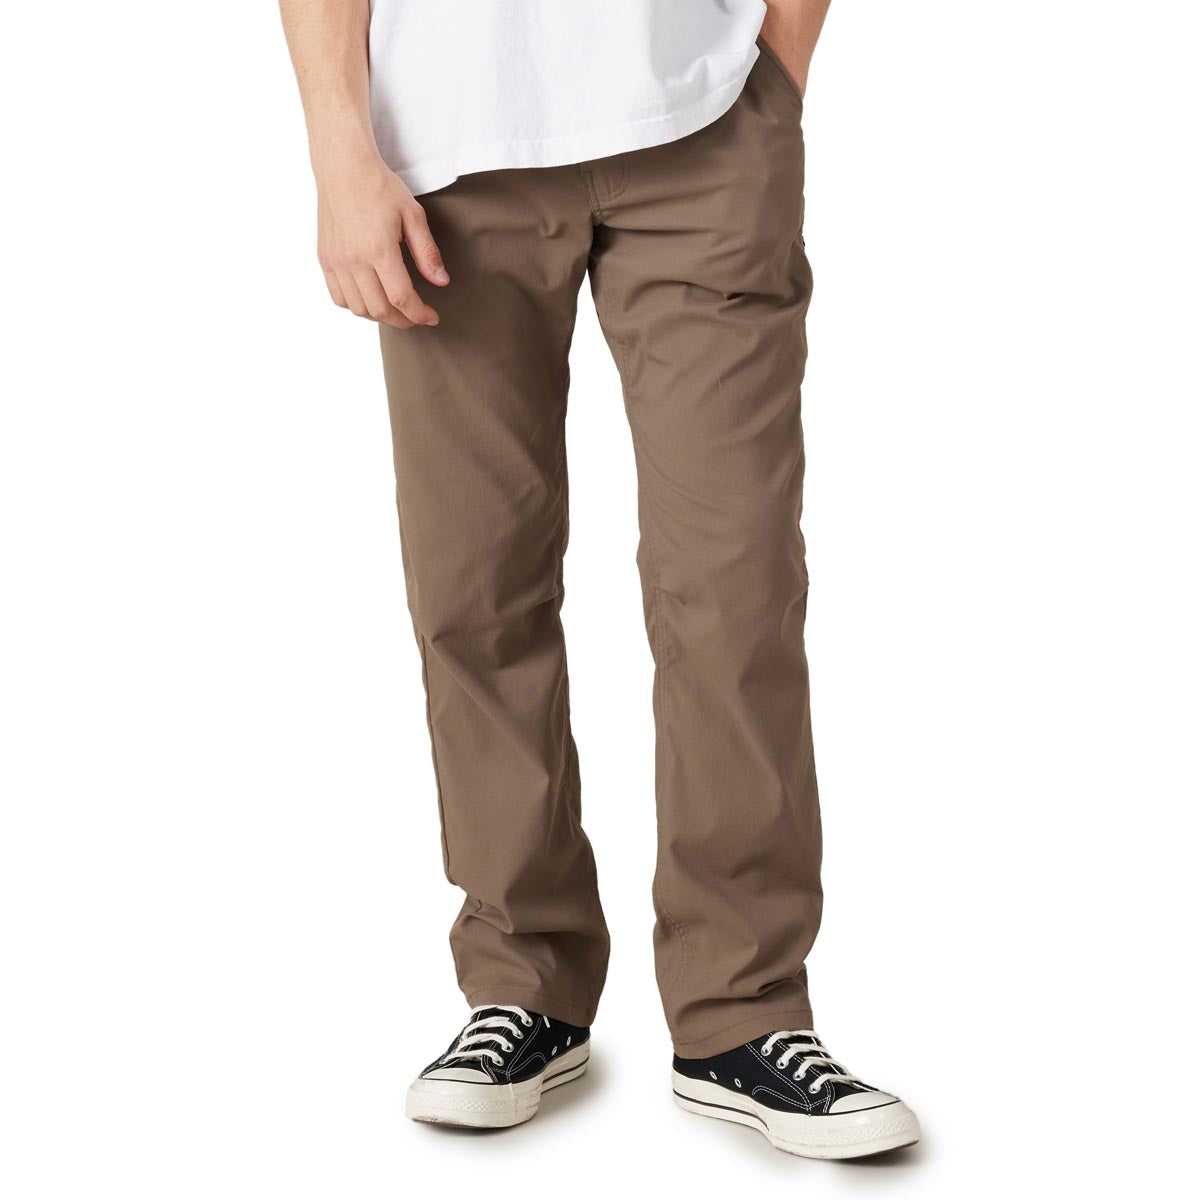 686 Everywhere Relaxed Pants - Tobacco image 1